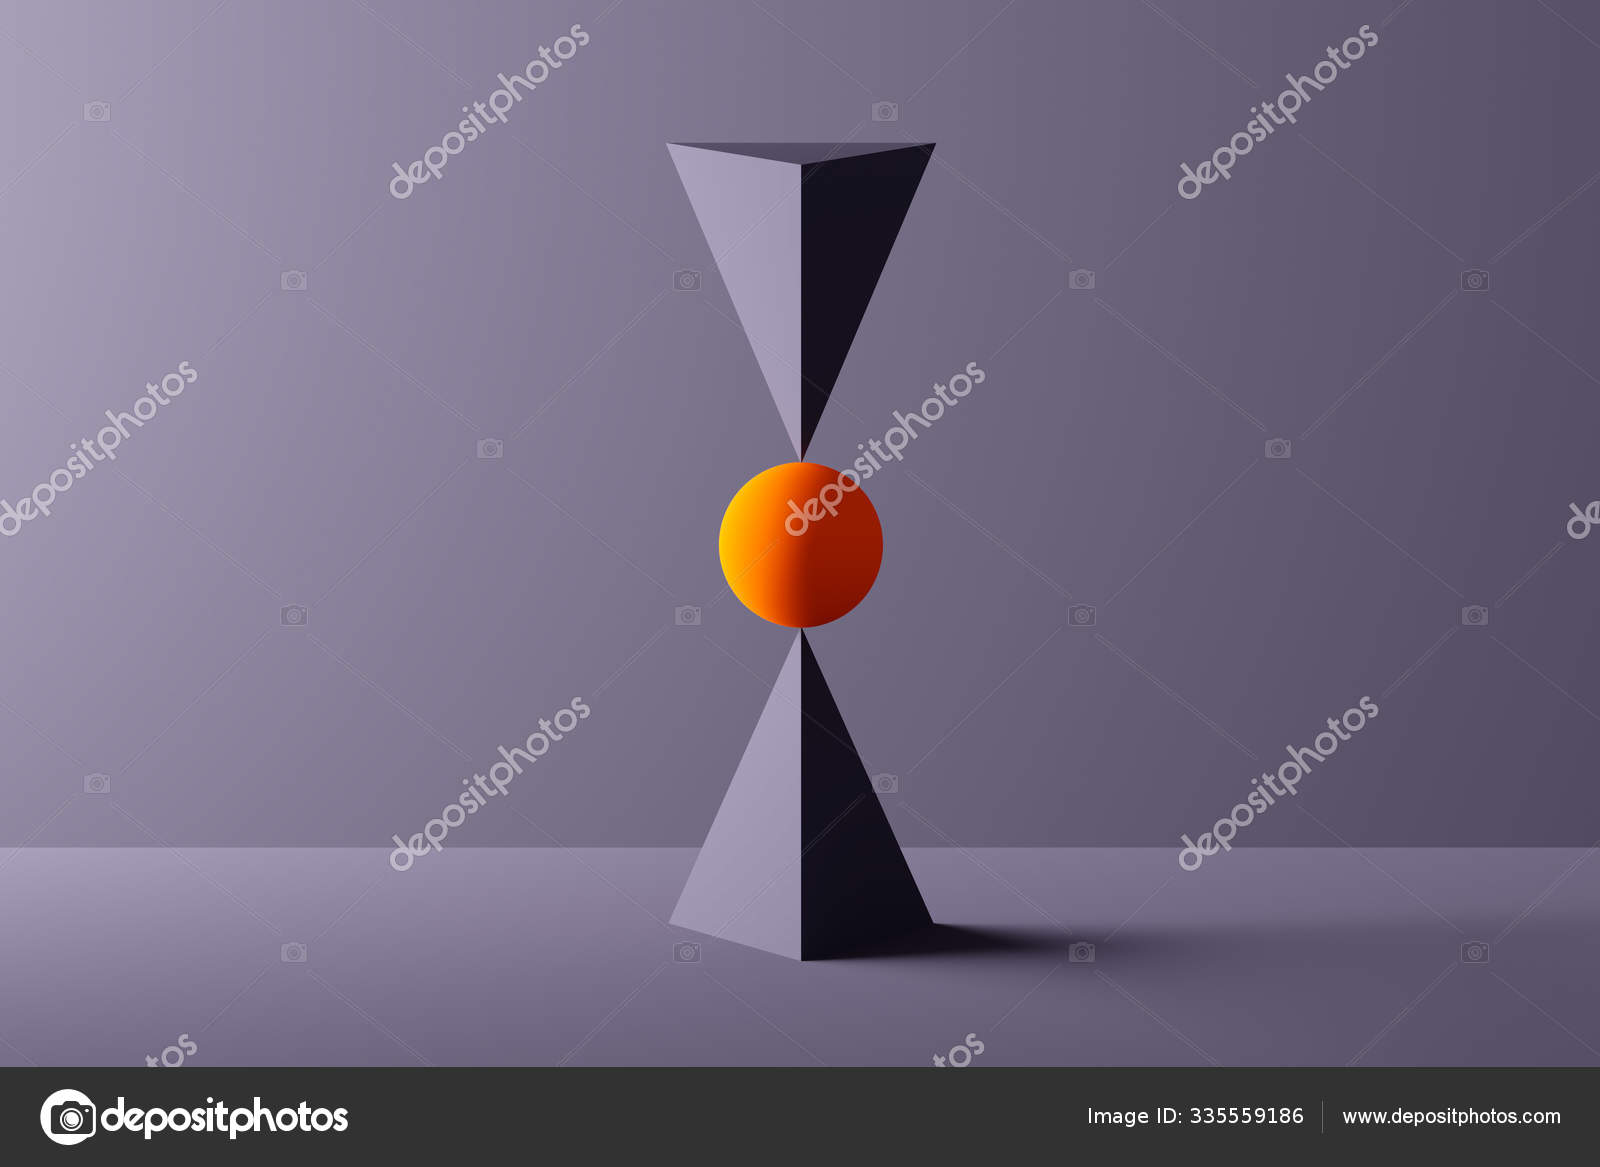 Geometric shapes in perfect balance - 3D Rendering Stock Photo by